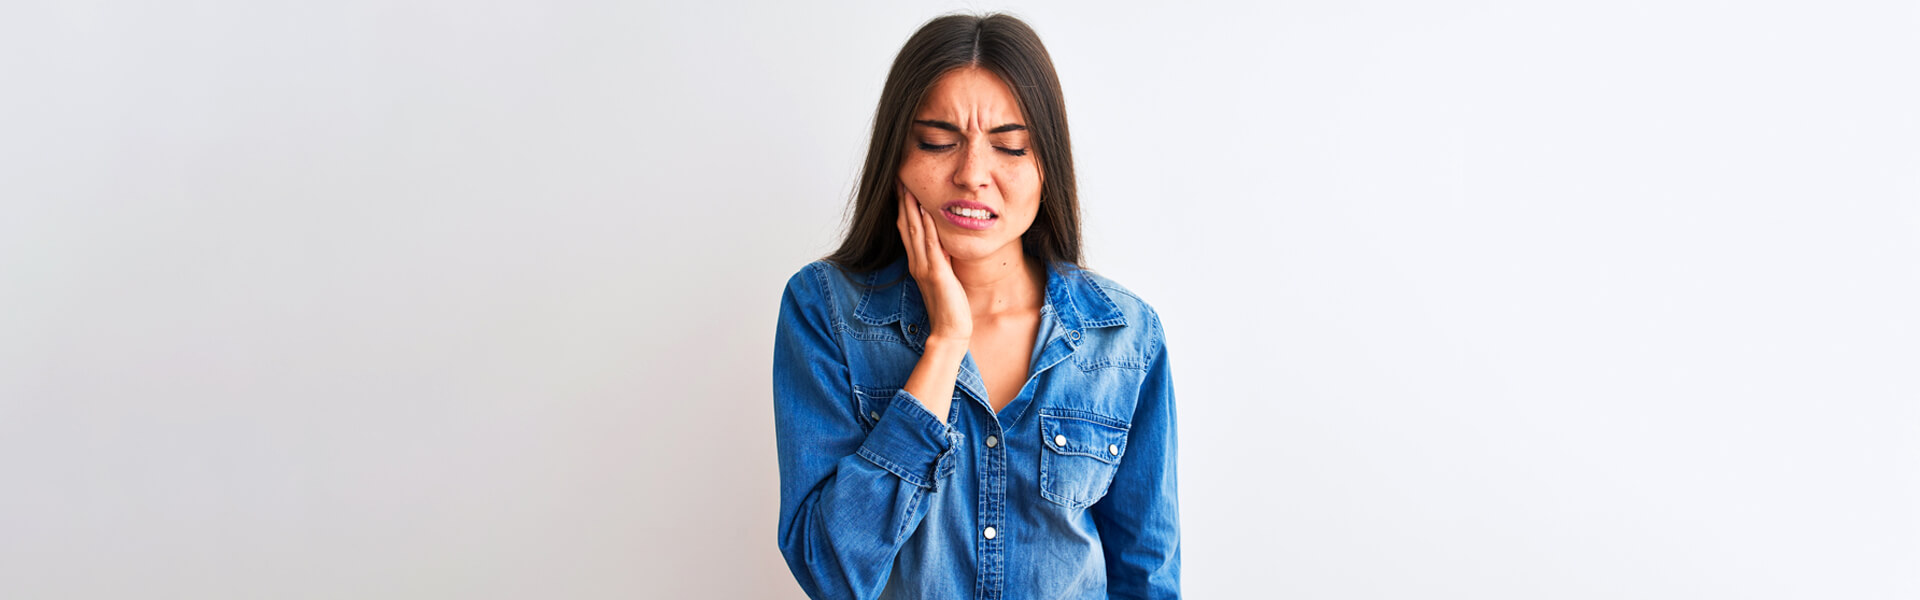 7 Common Dental Emergencies that Require Getting Emergency Dental Care